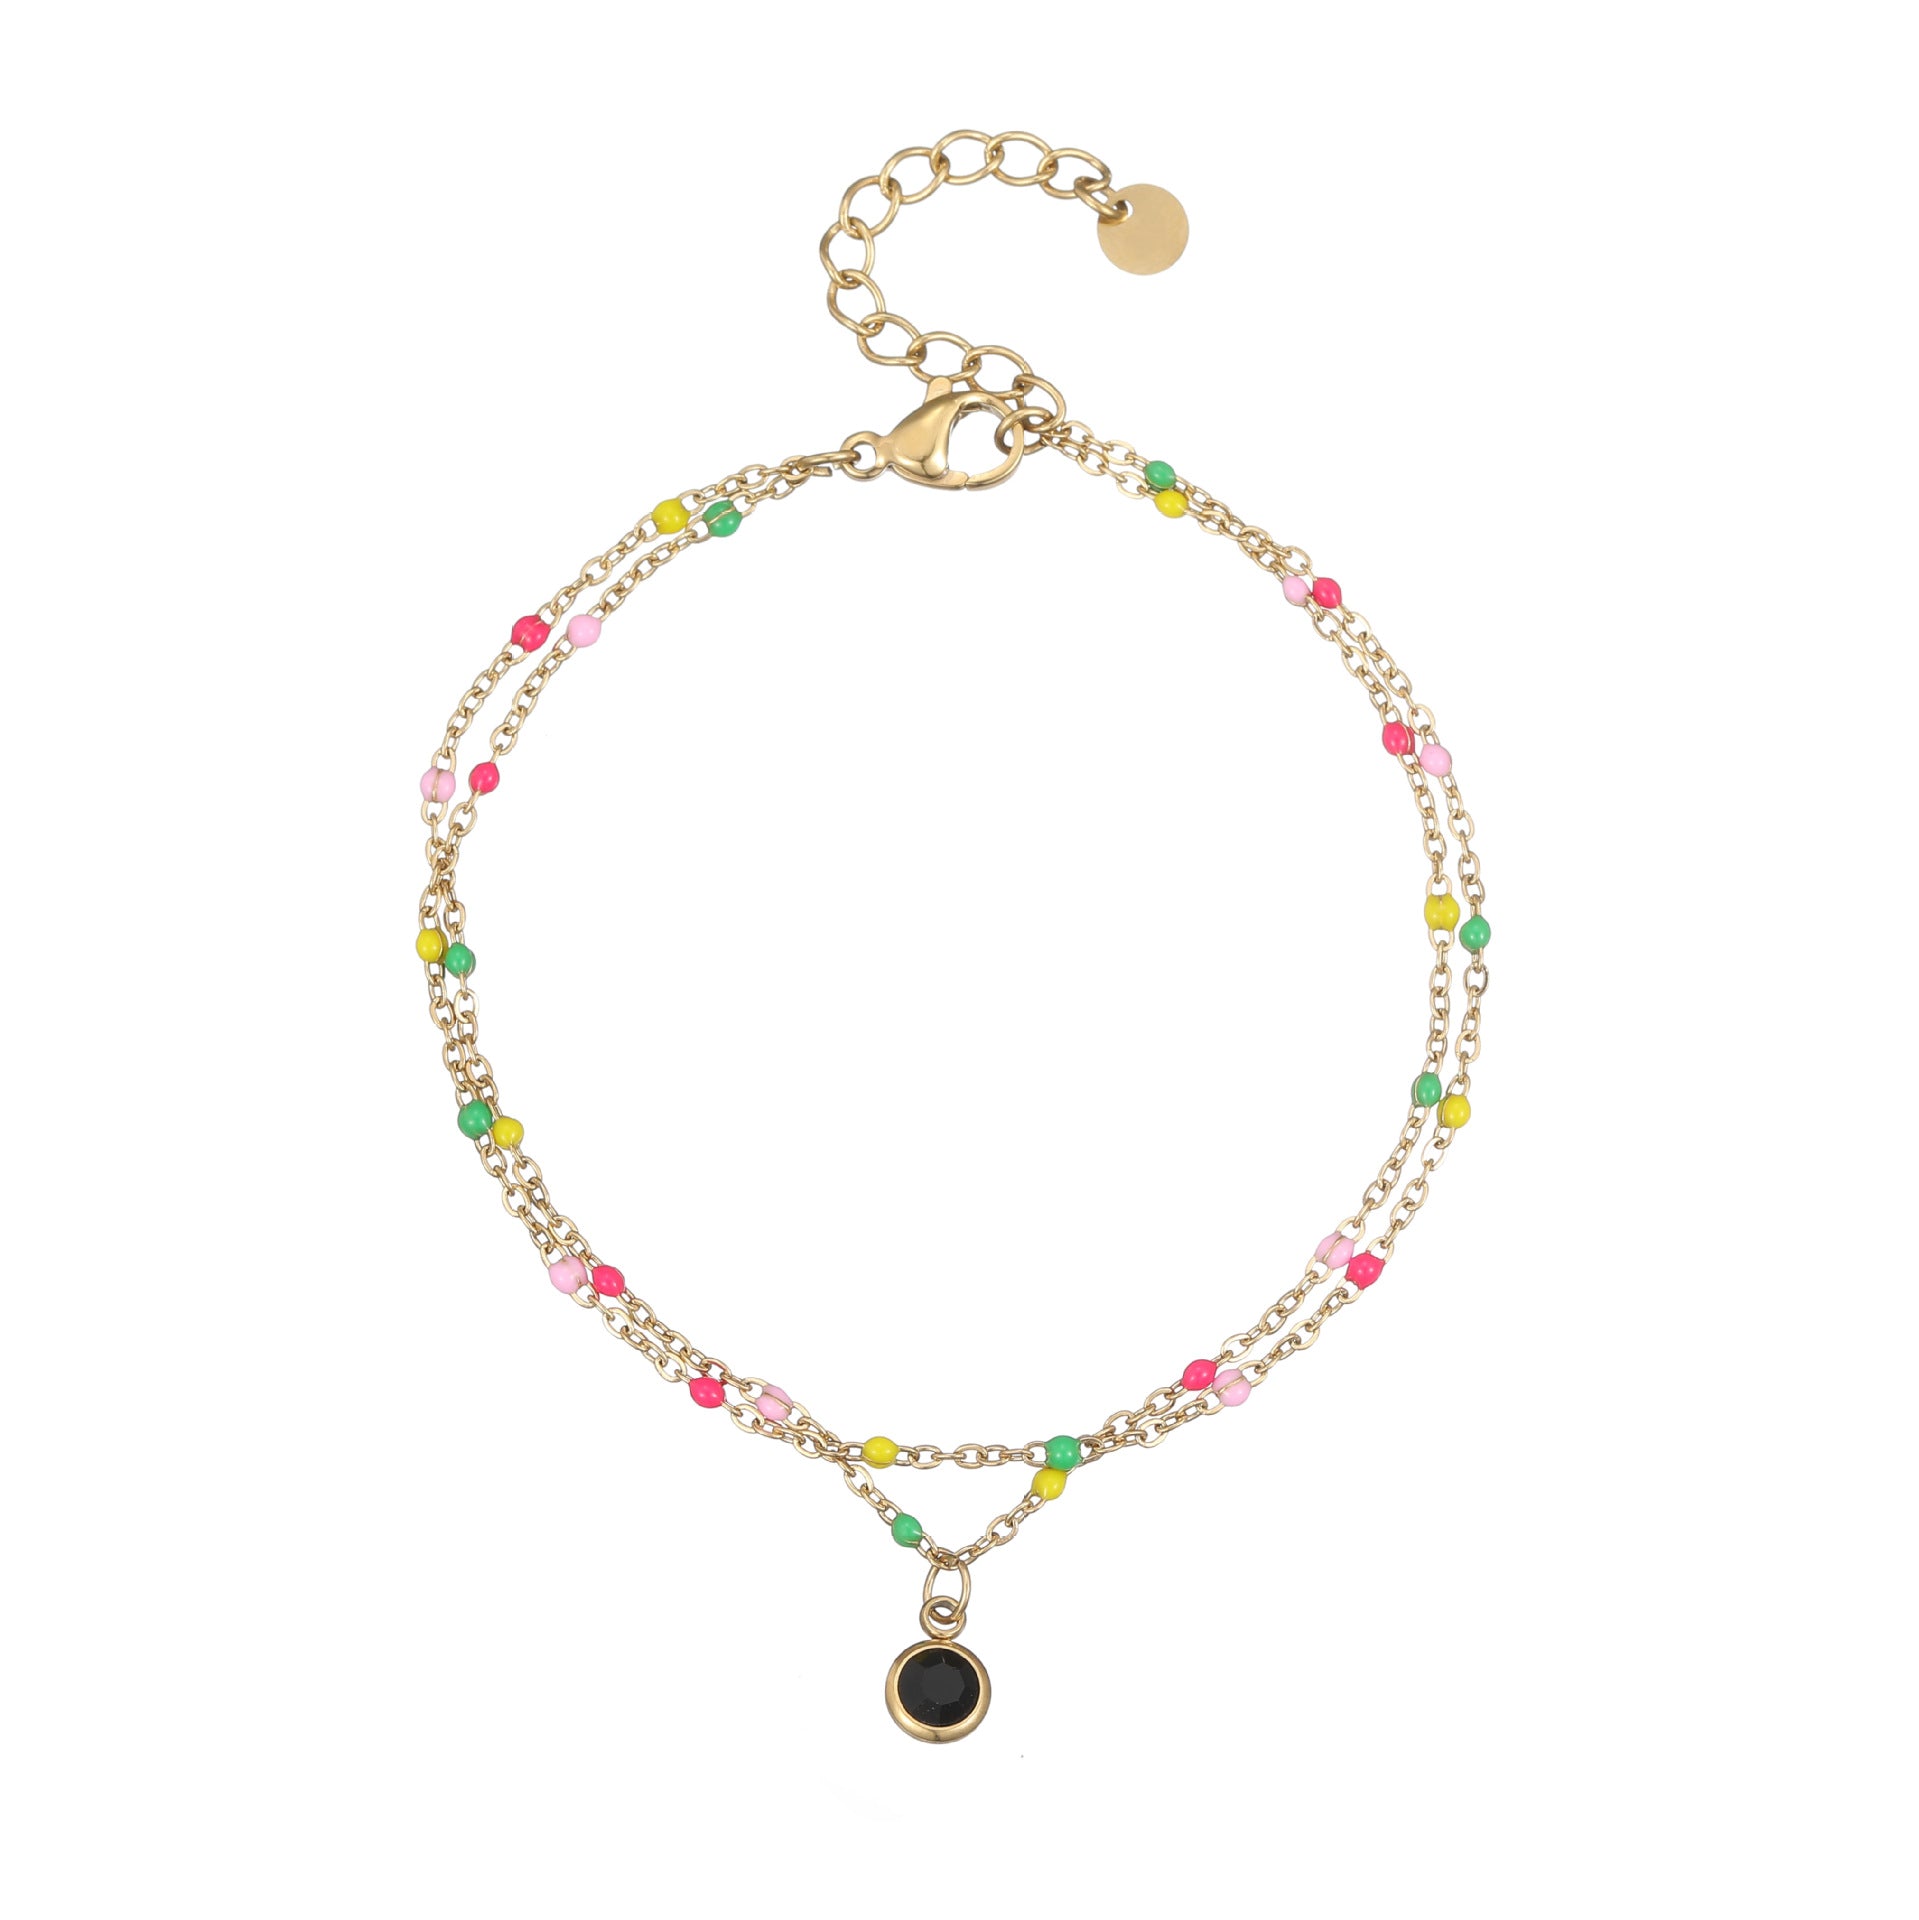 Simple Fashion Versatile Korean-Style 2-Layer Bracelet with Colorful Beads and Unique Design  UponBasics   